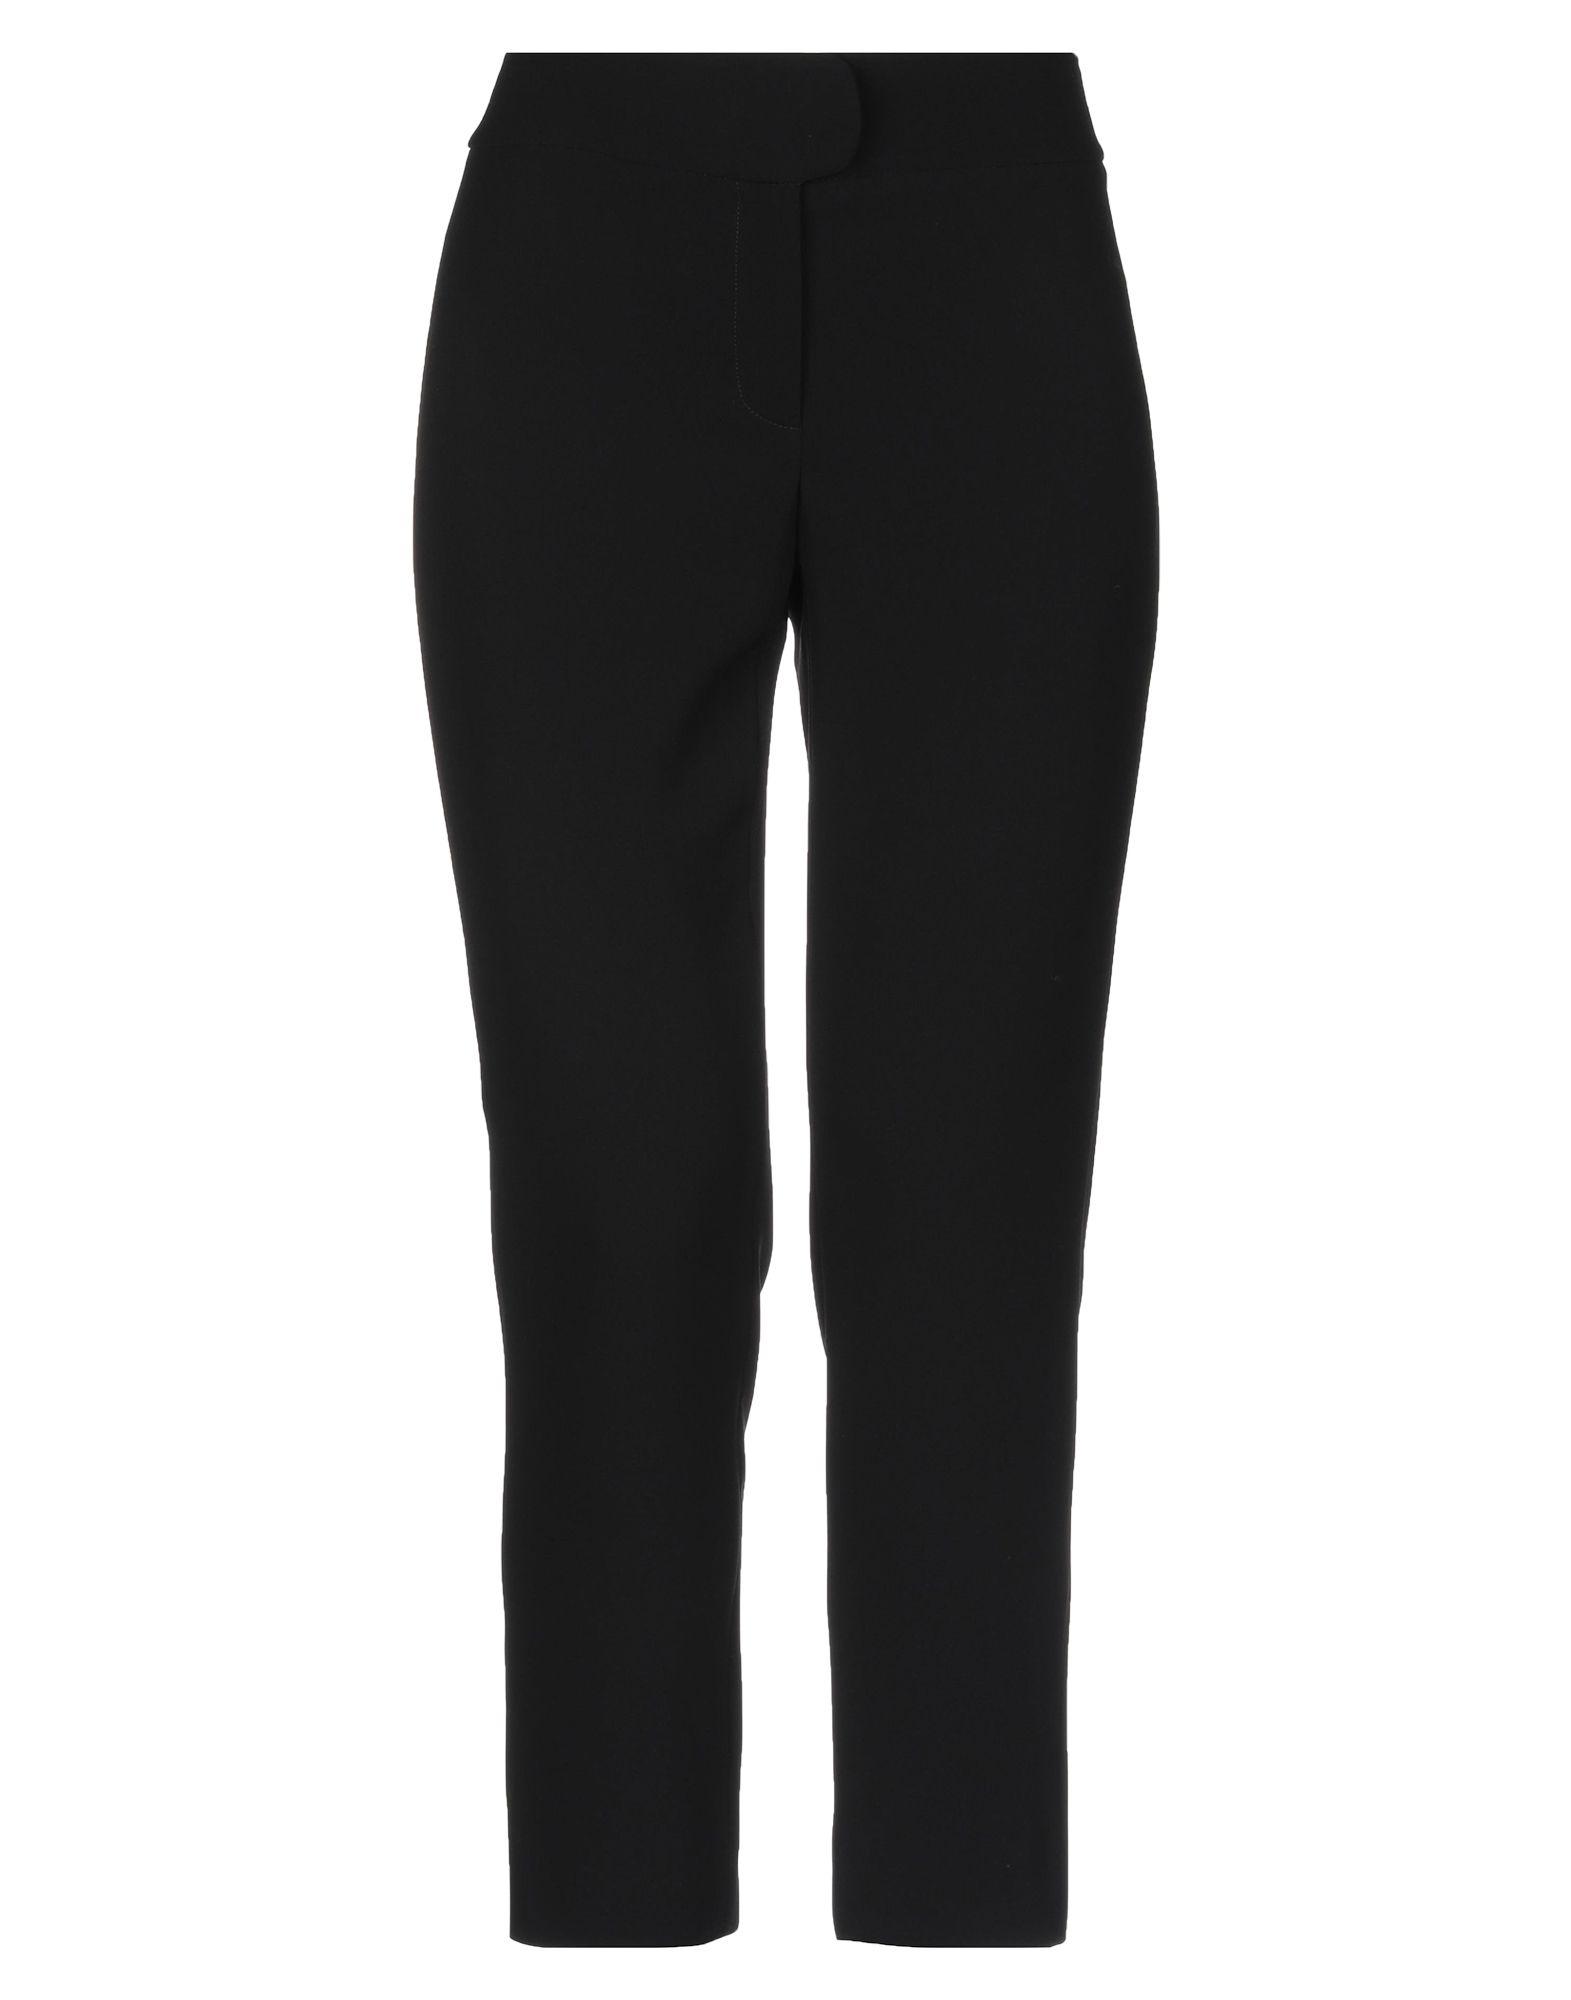 Moschino Synthetic Casual Pants in Black - Lyst